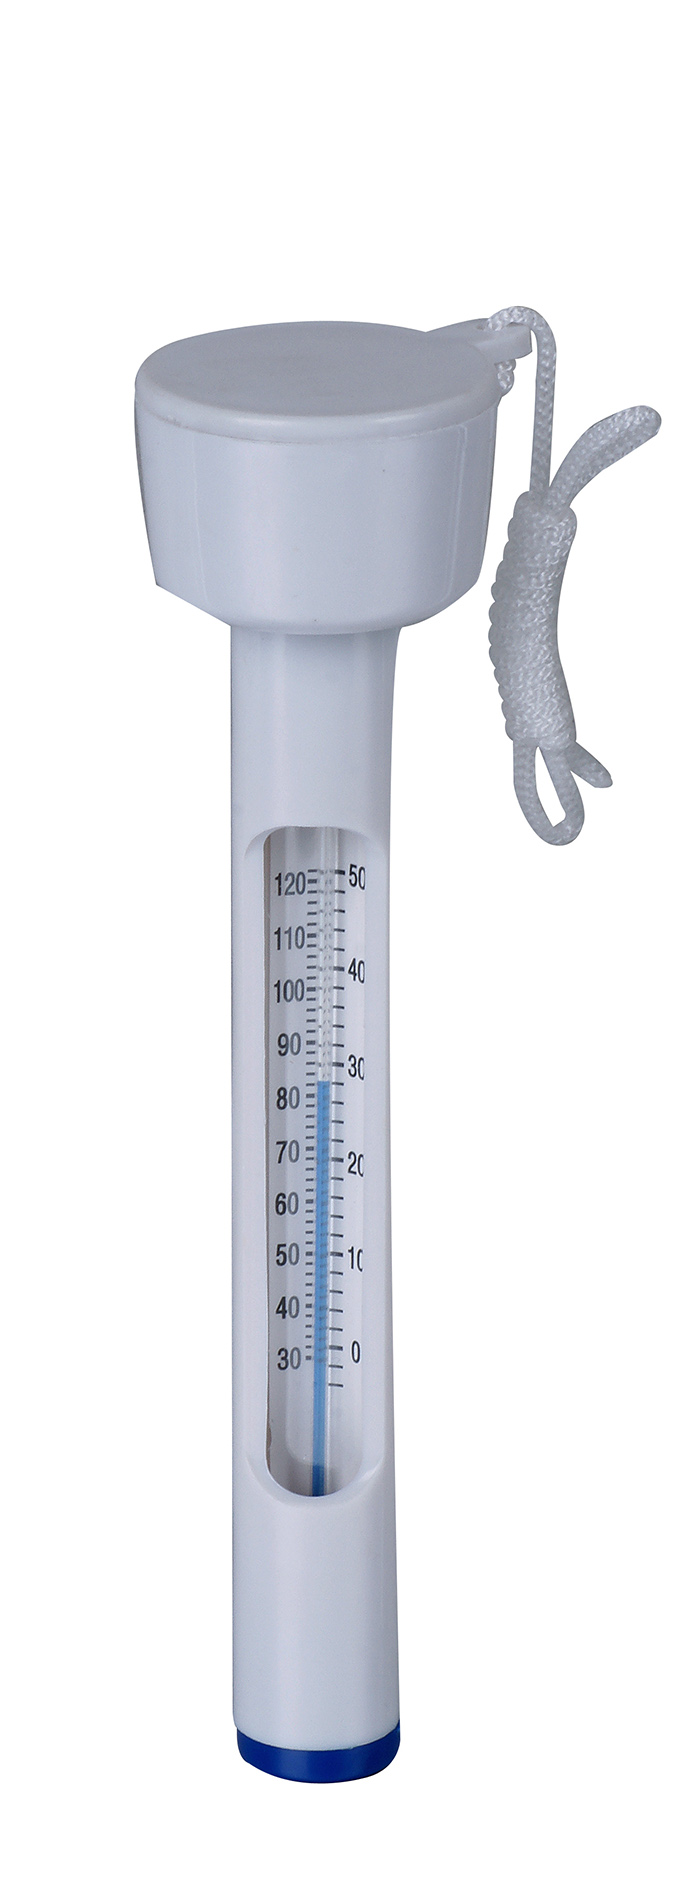 DELUXE FLOATING THERMOMETER 24CM